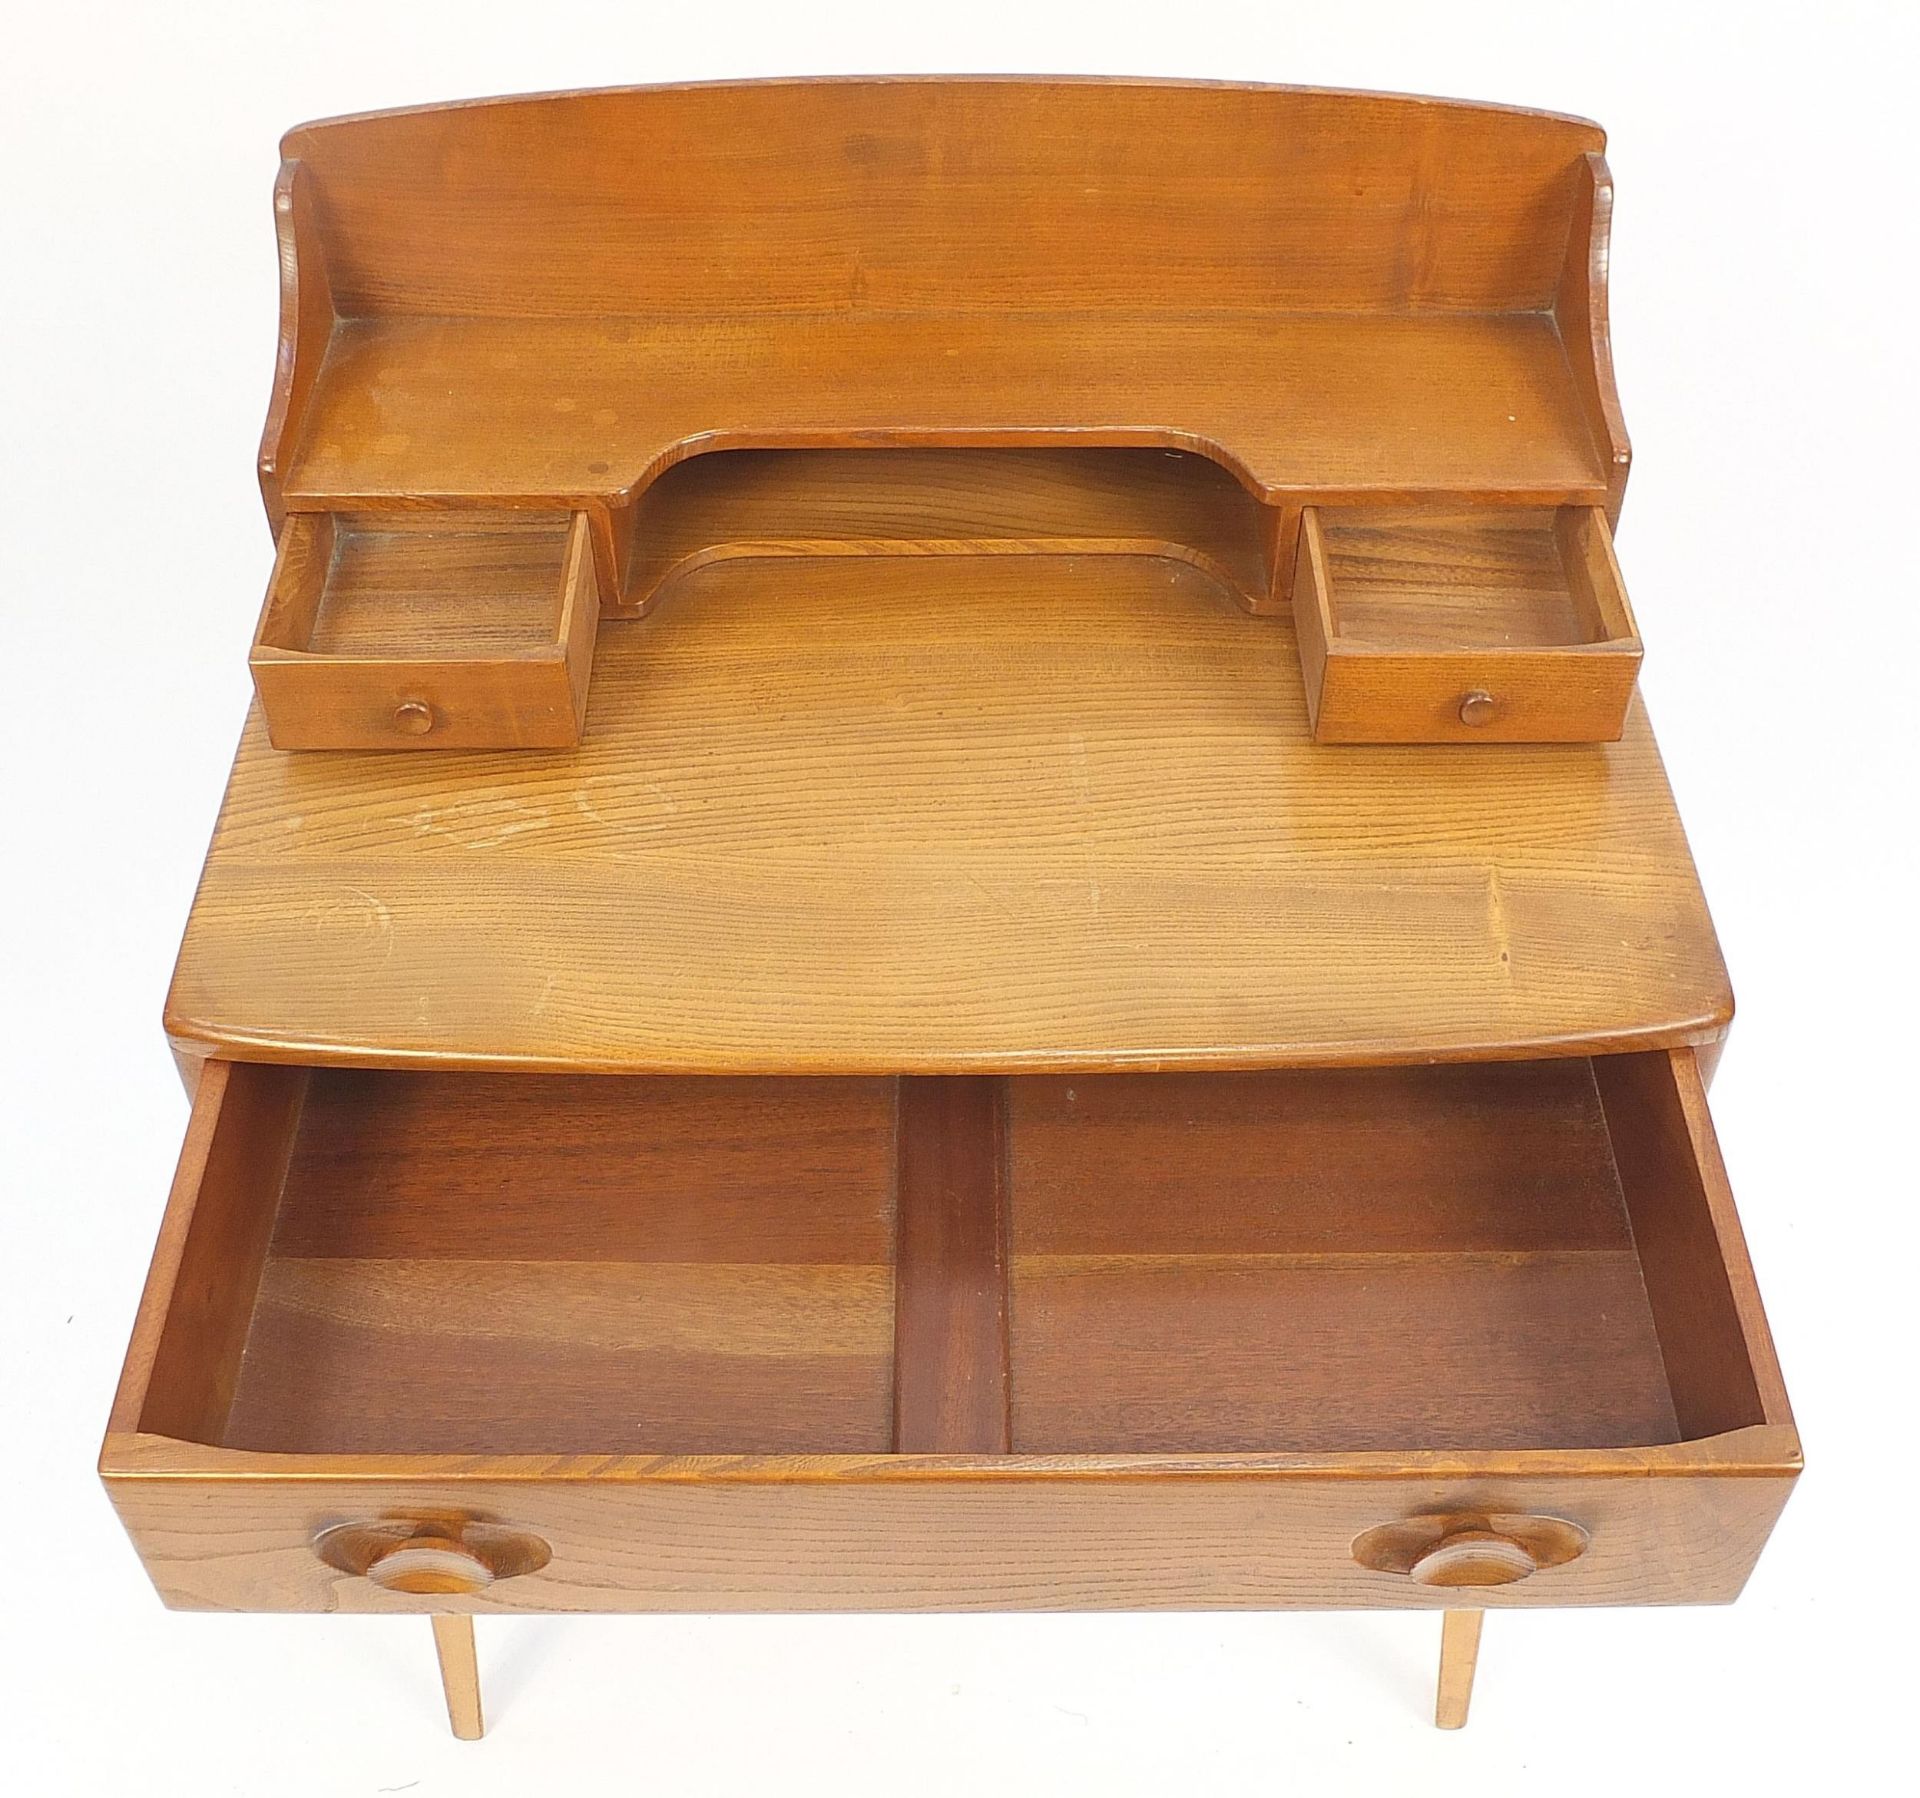 Ercol light elm dressing table with three drawers, 93cm H x 68.5cm W x 48cm D - Image 4 of 6